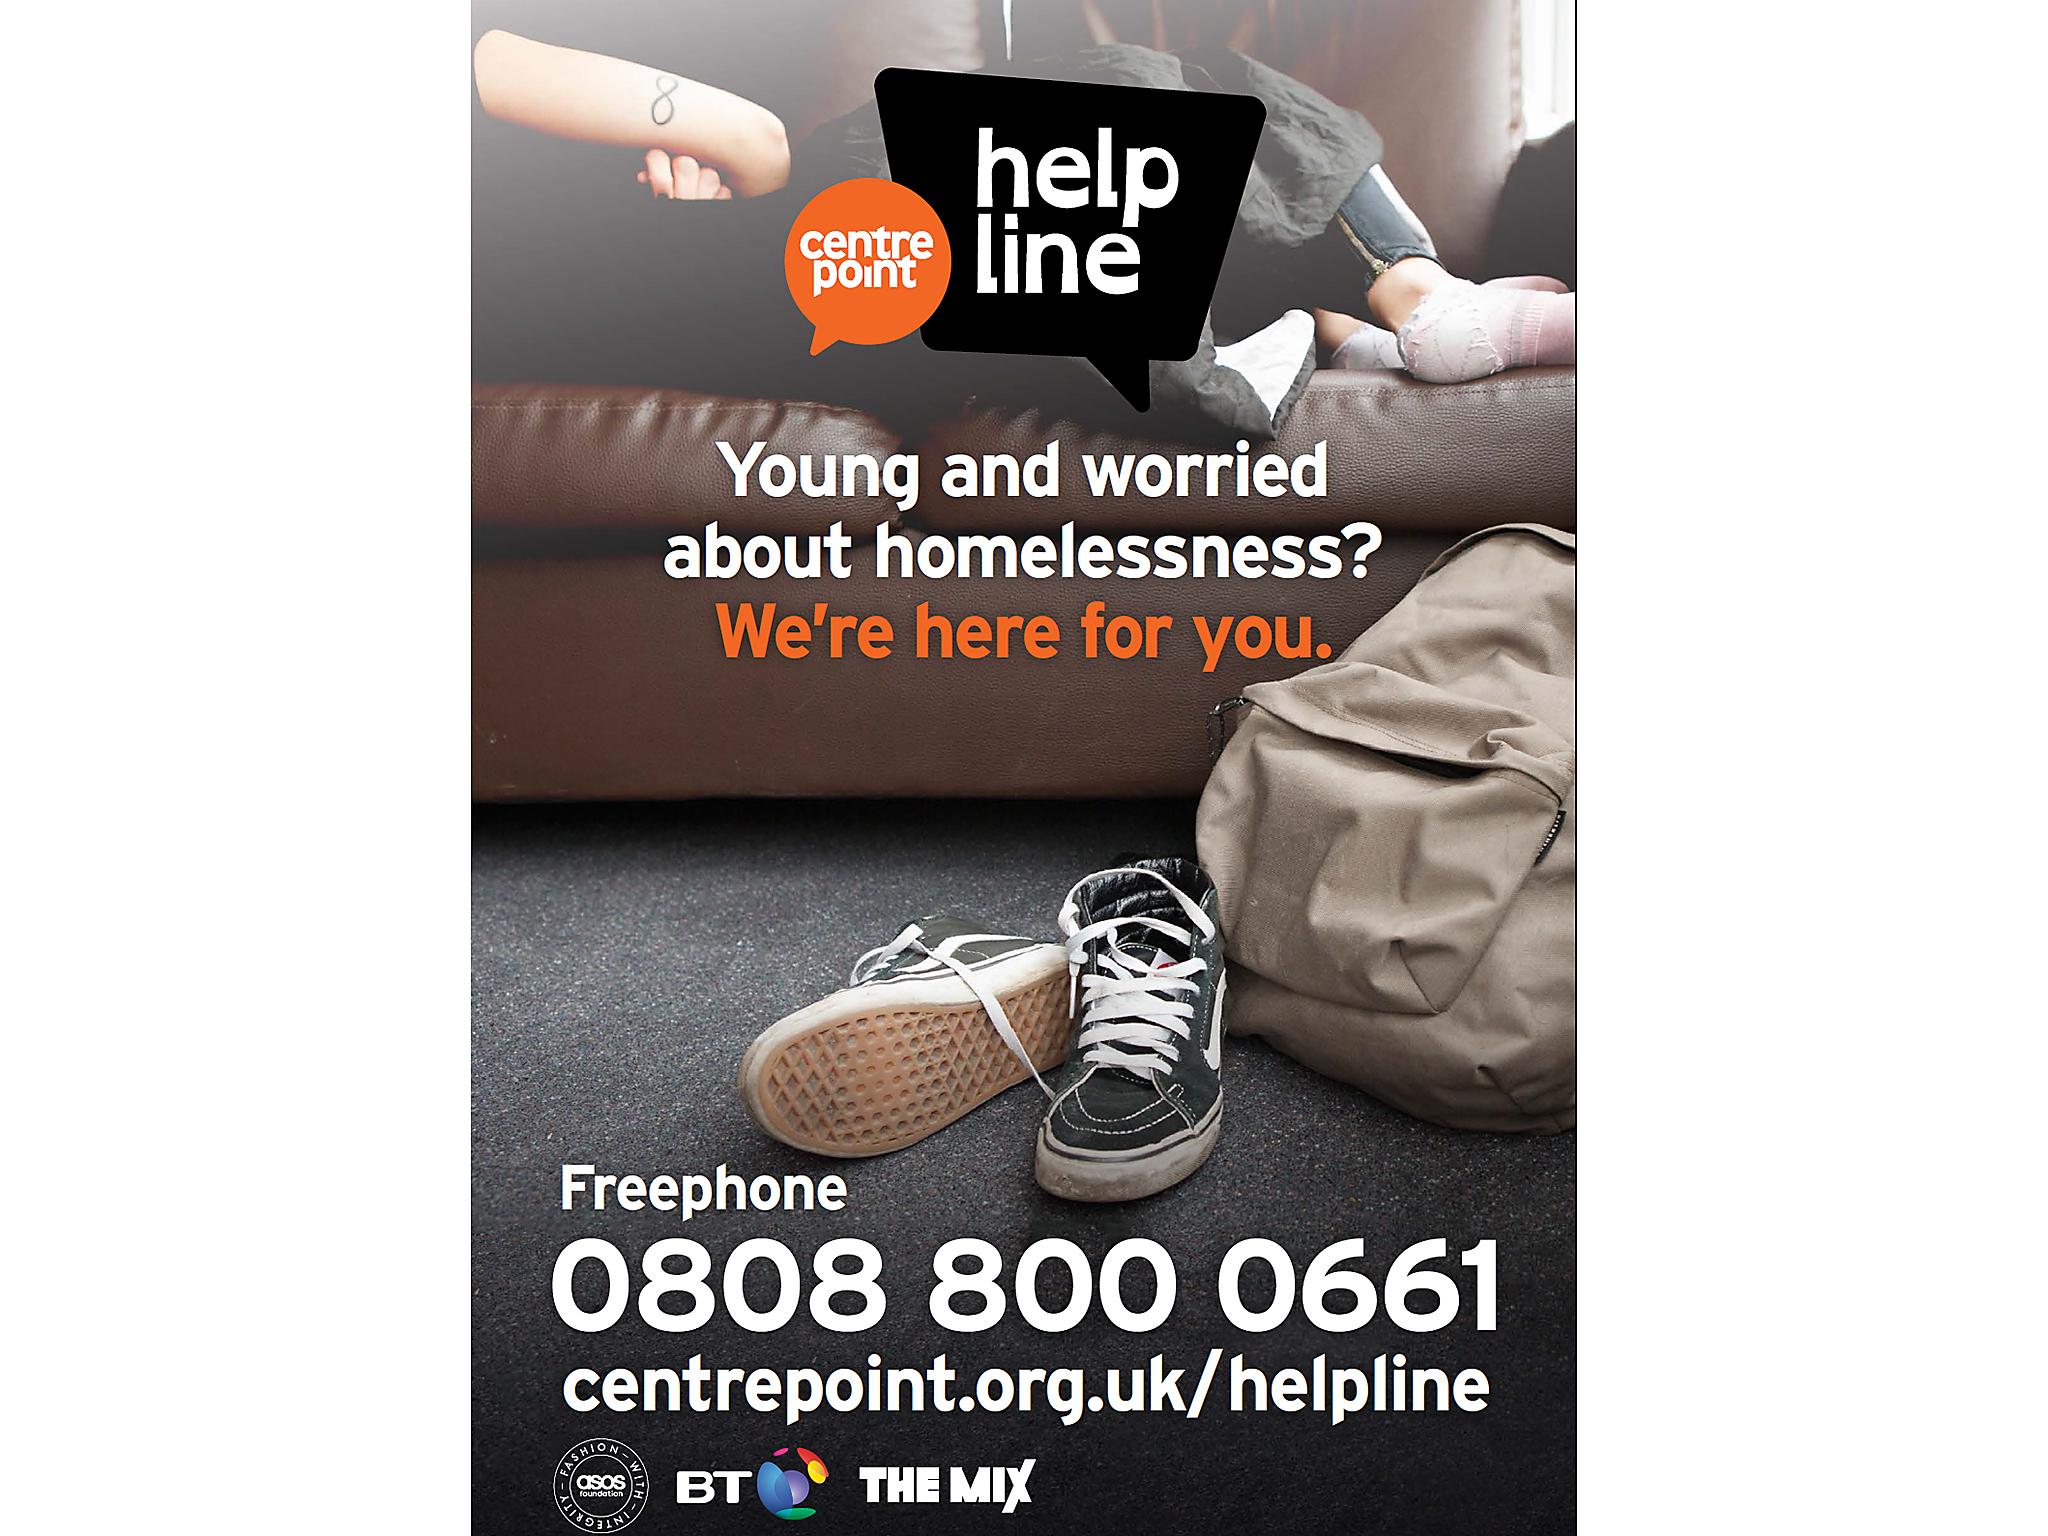 These posters – available for download from the Centrepoint website – will spread the word about the first nationwide helpline for young people facing homelessness